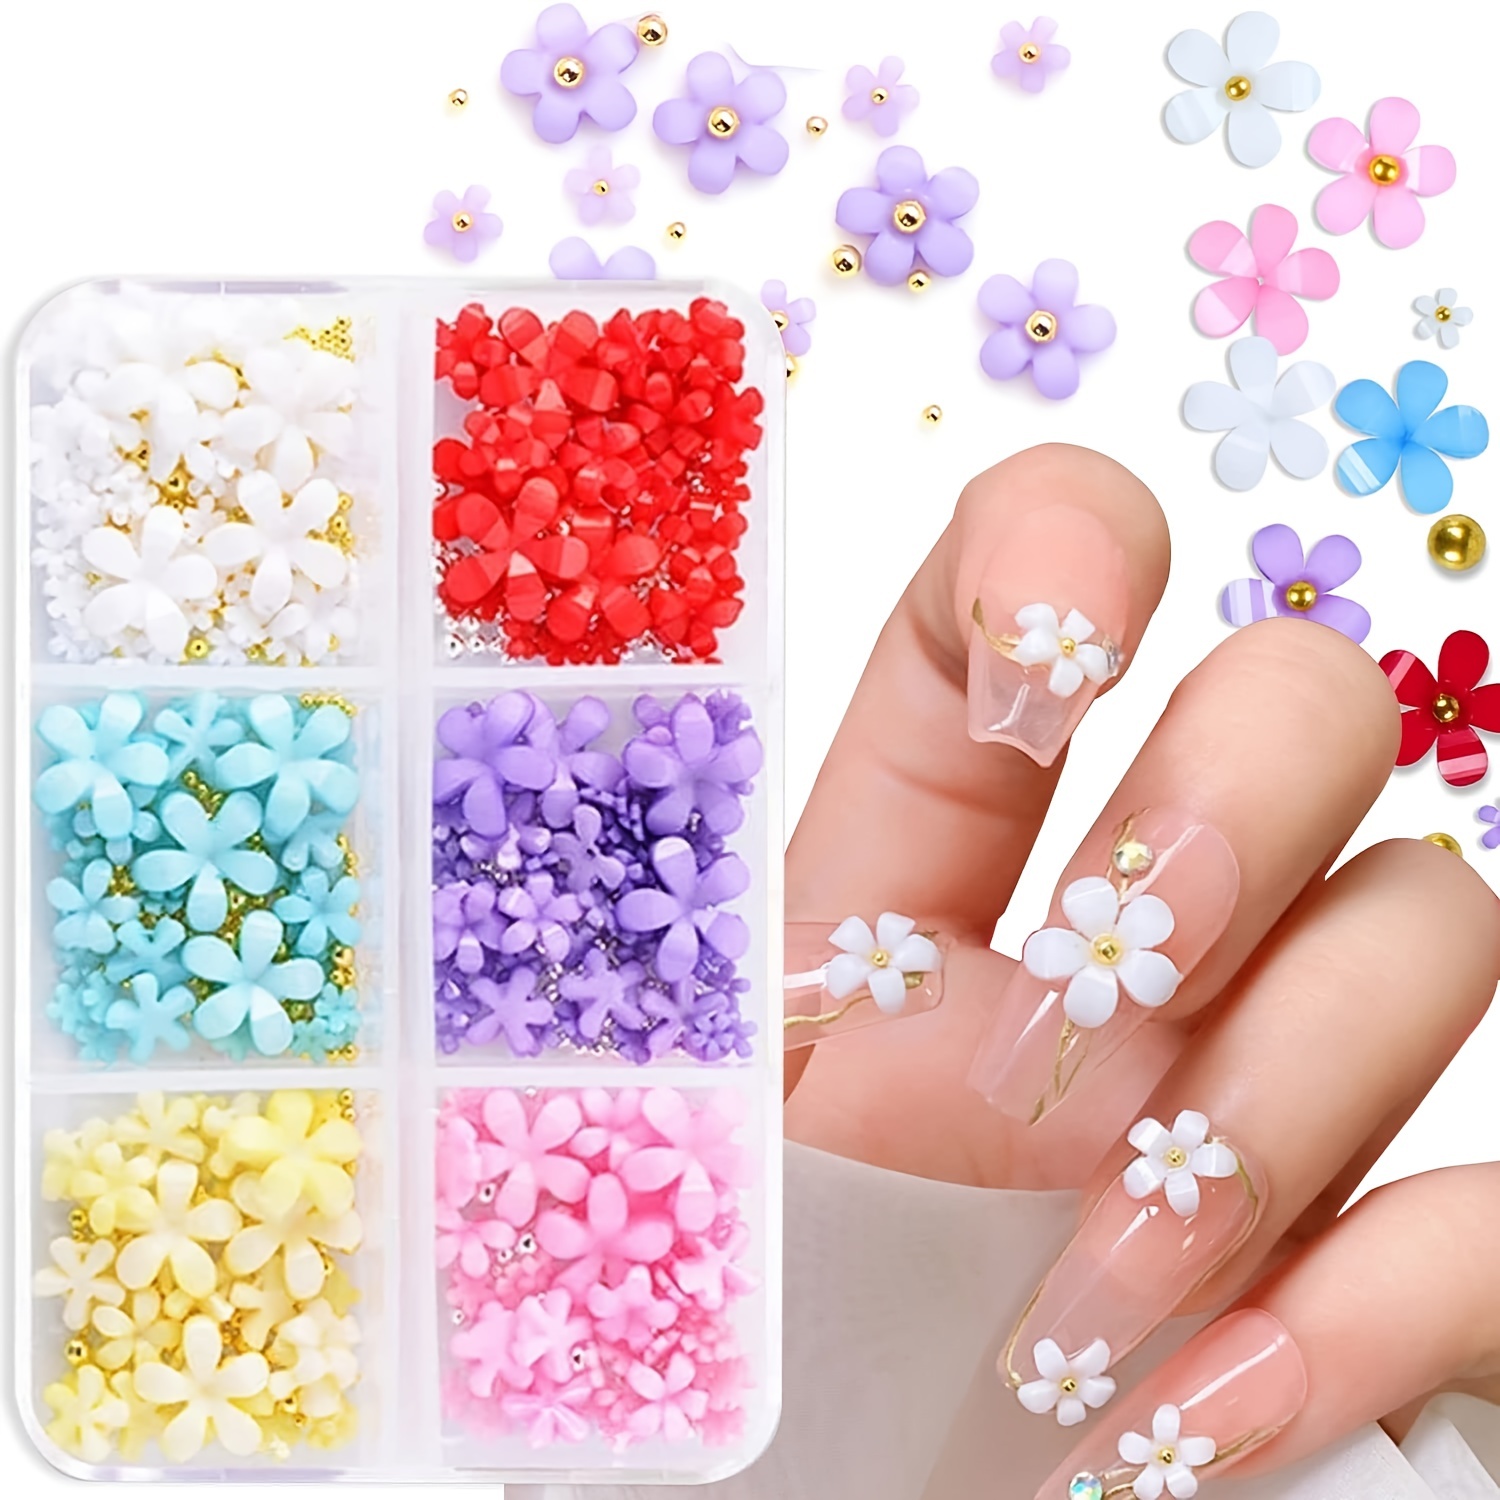 Dornail 30PCS Acrylic Flower Nail Charms,3D Gold Edge Flower Resin Charms  for Nails Mixed Colorful Flower Petals Nail Art Charms Floral Nail Charm  DIY